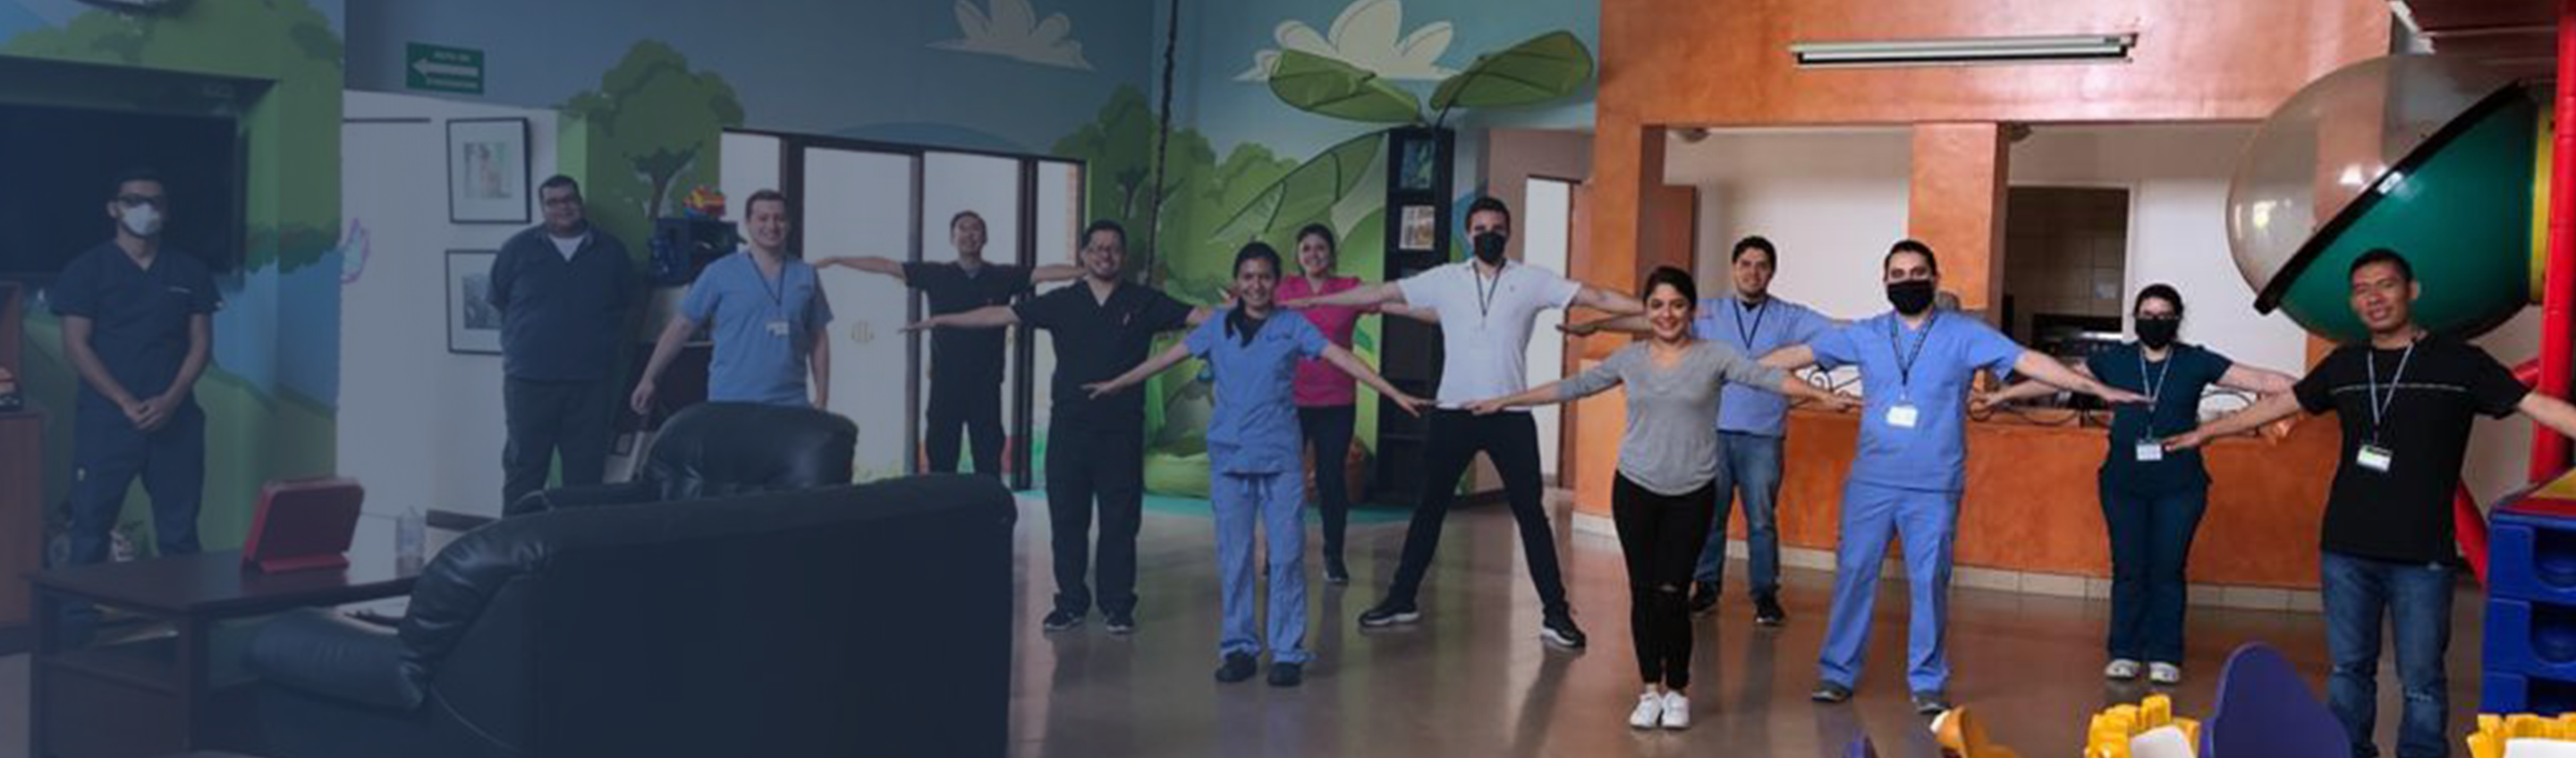 13 healthcare workers and administrators demonstrating social distancing, most wearing face masks and holding arms outstretched to show at least 6 feet of personal space